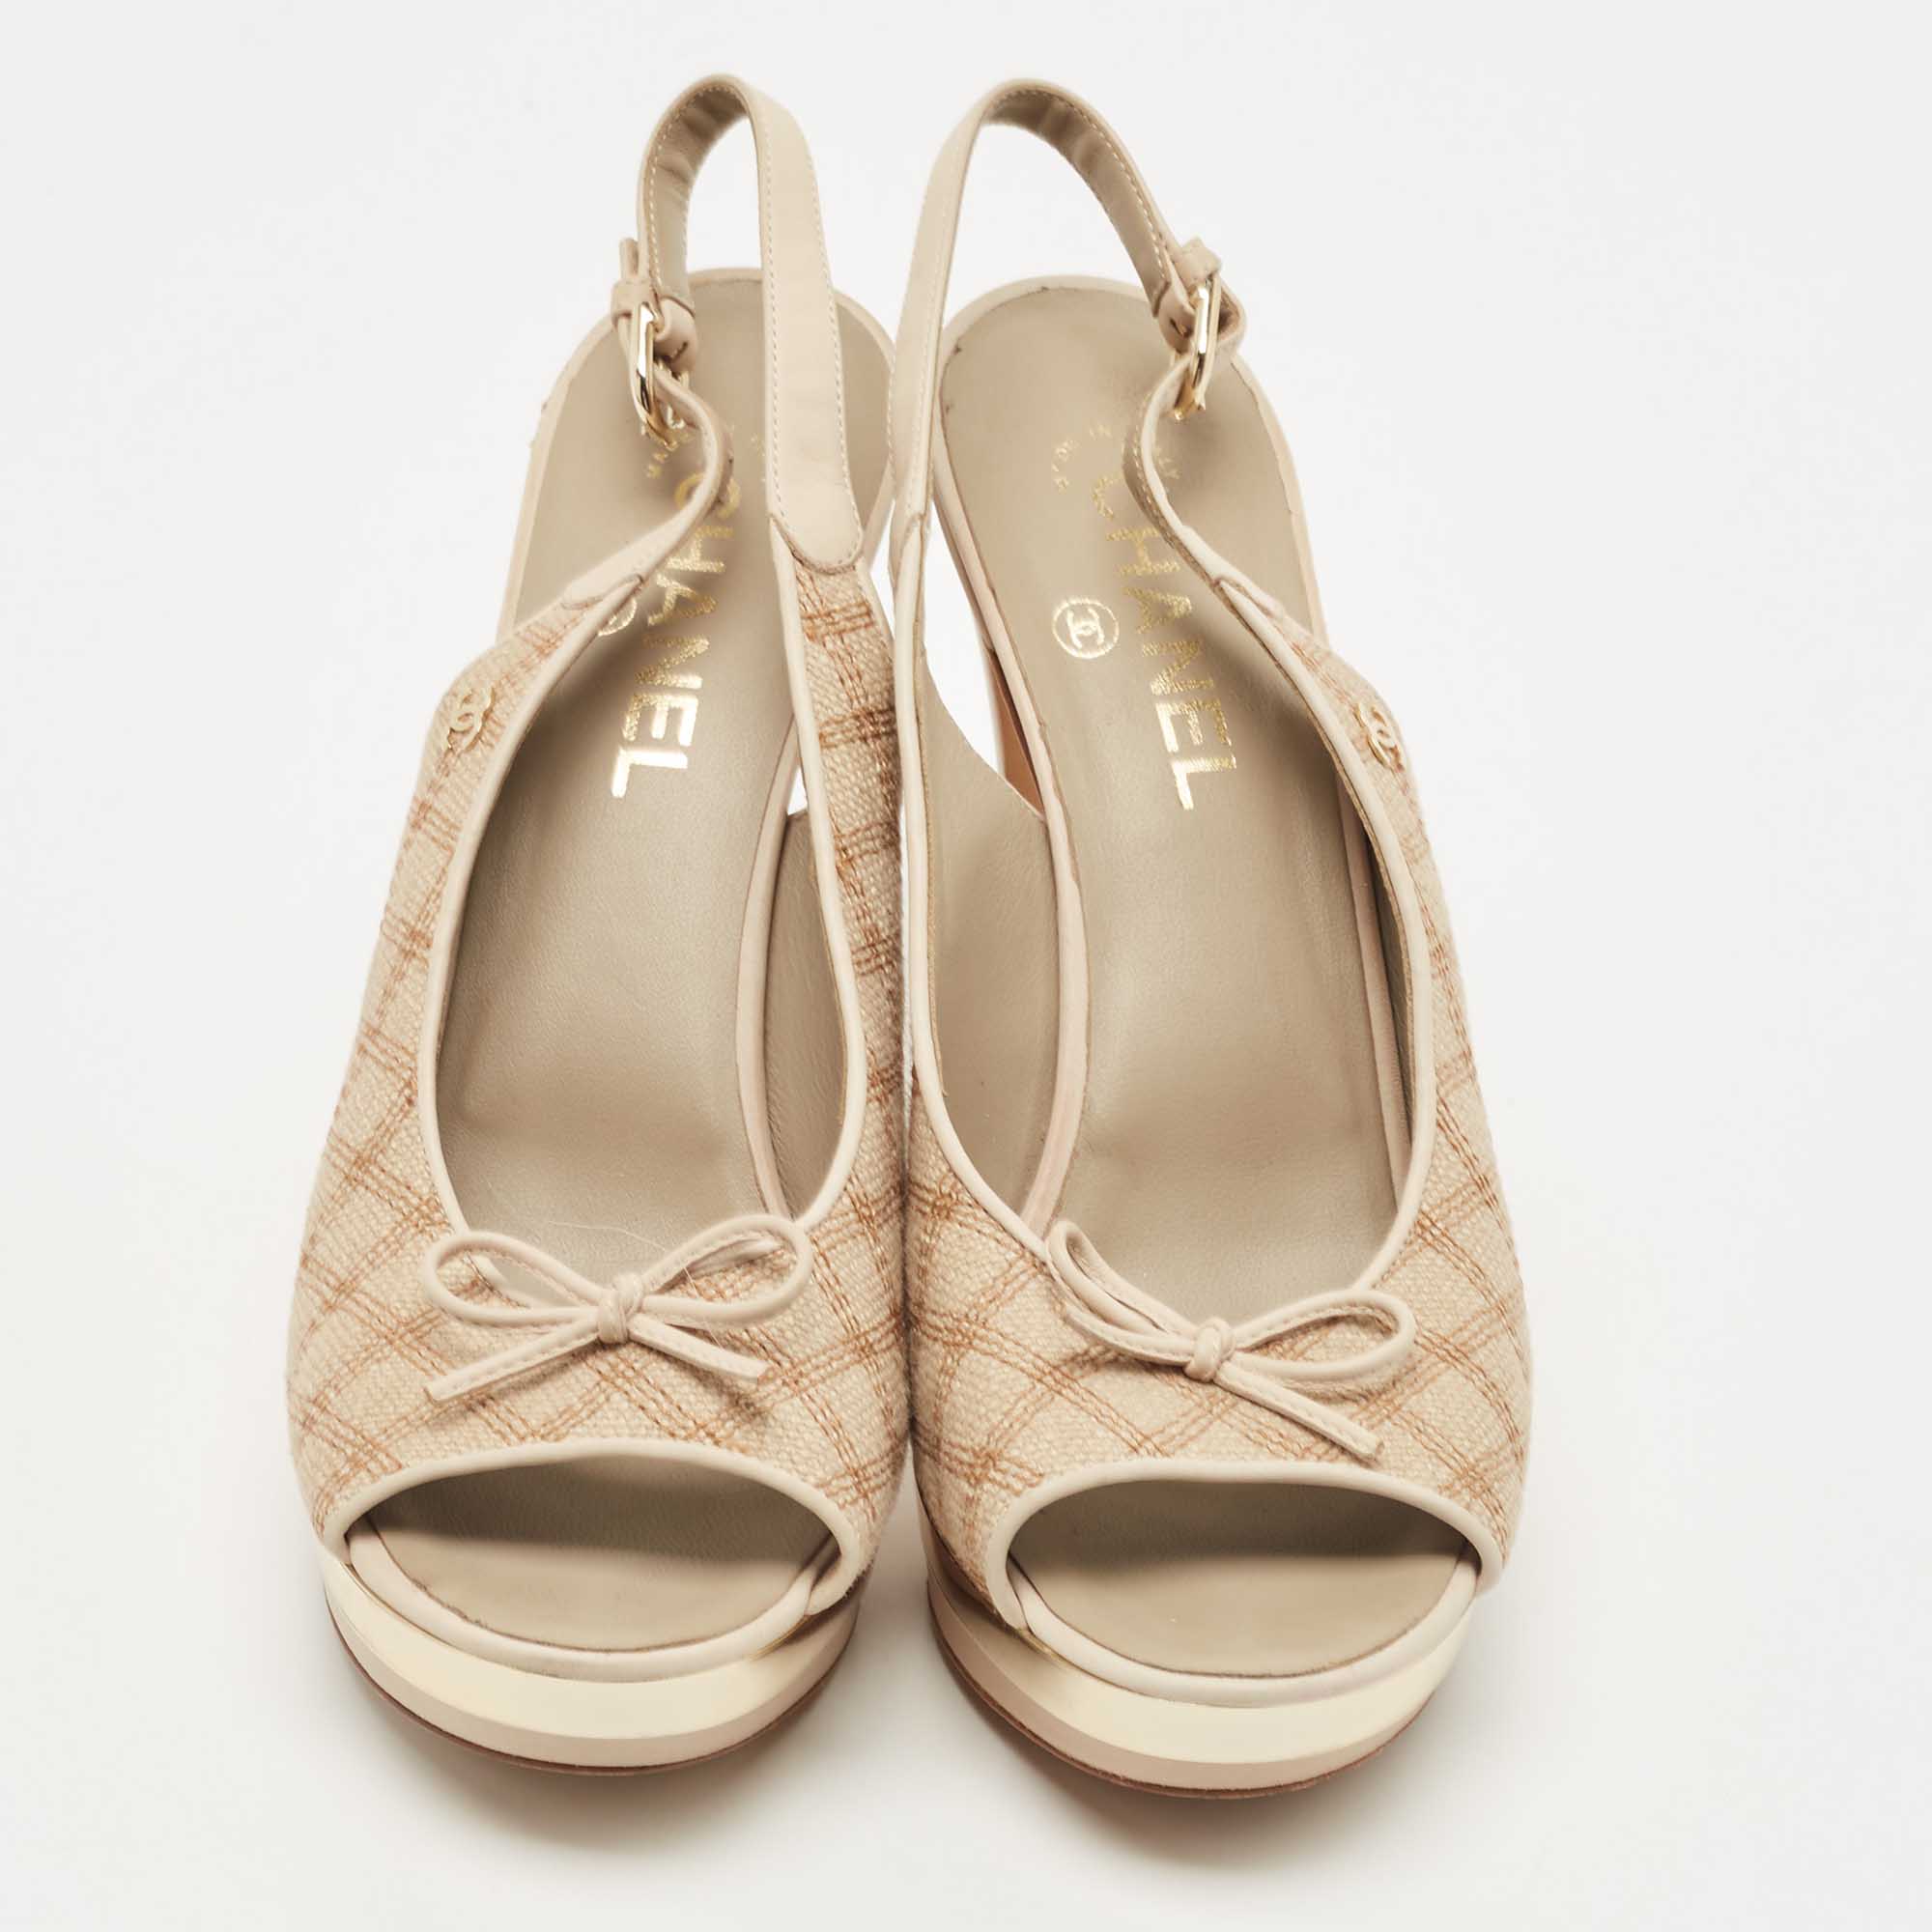 Chanel Cream/Beige Canvas And Leather CC Bow Peep Toe Platform Slingback Sandals Size 40.5